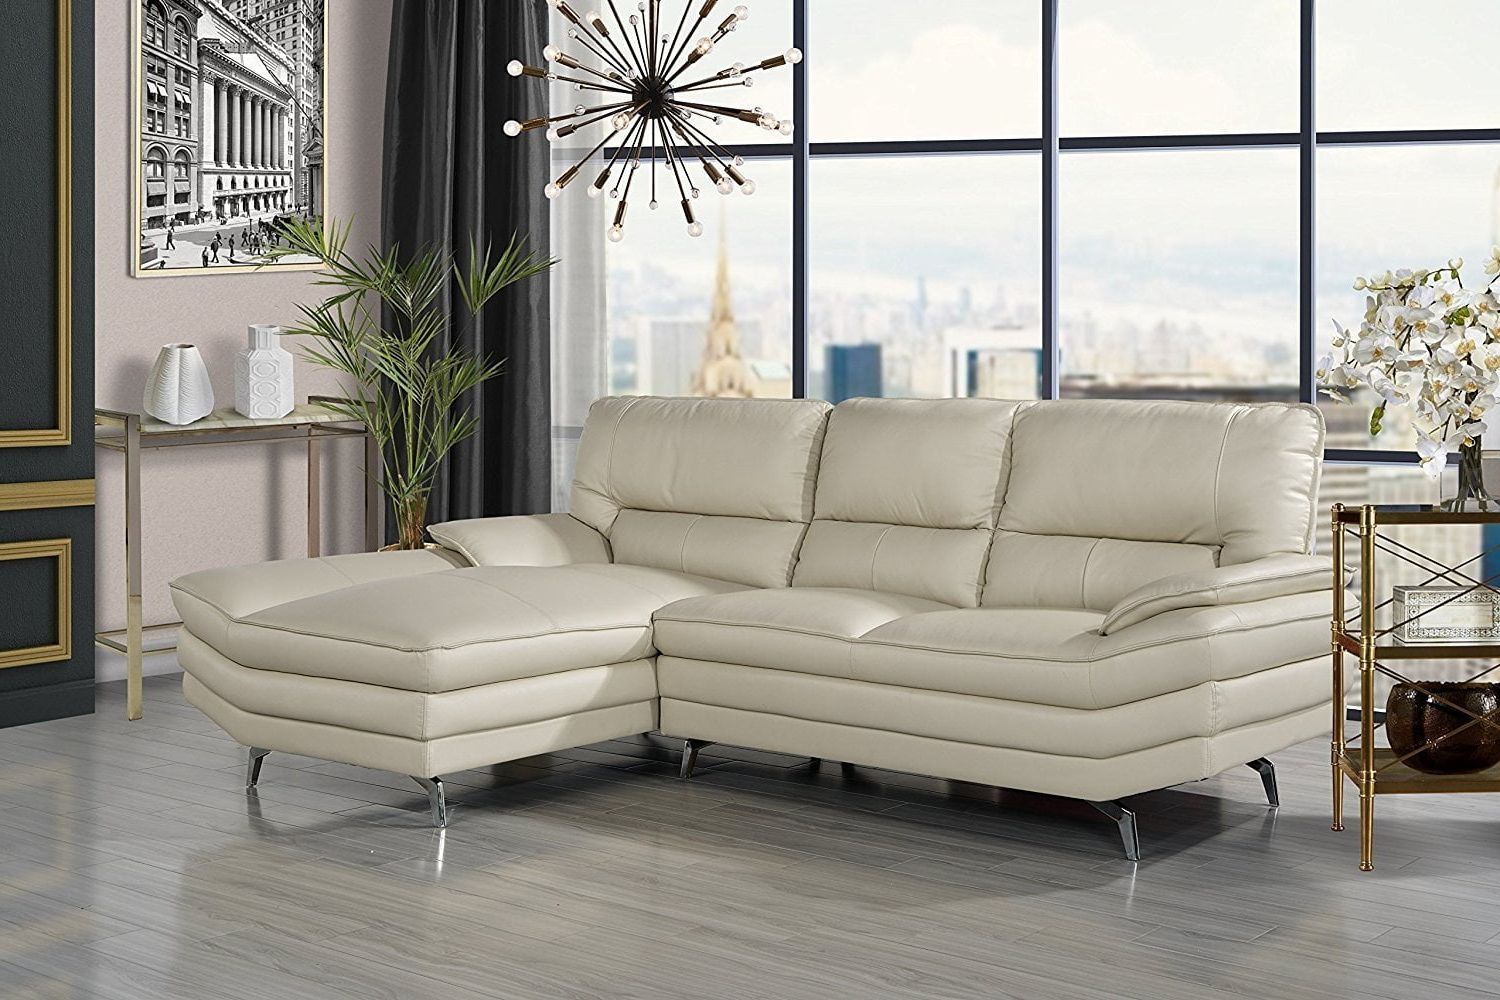 Living Room Leather Sectional Sofa, L Shape Couch With Chaise Lounge Throughout Most Current Beige L Shaped Sectional Sofas (Photo 13 of 15)